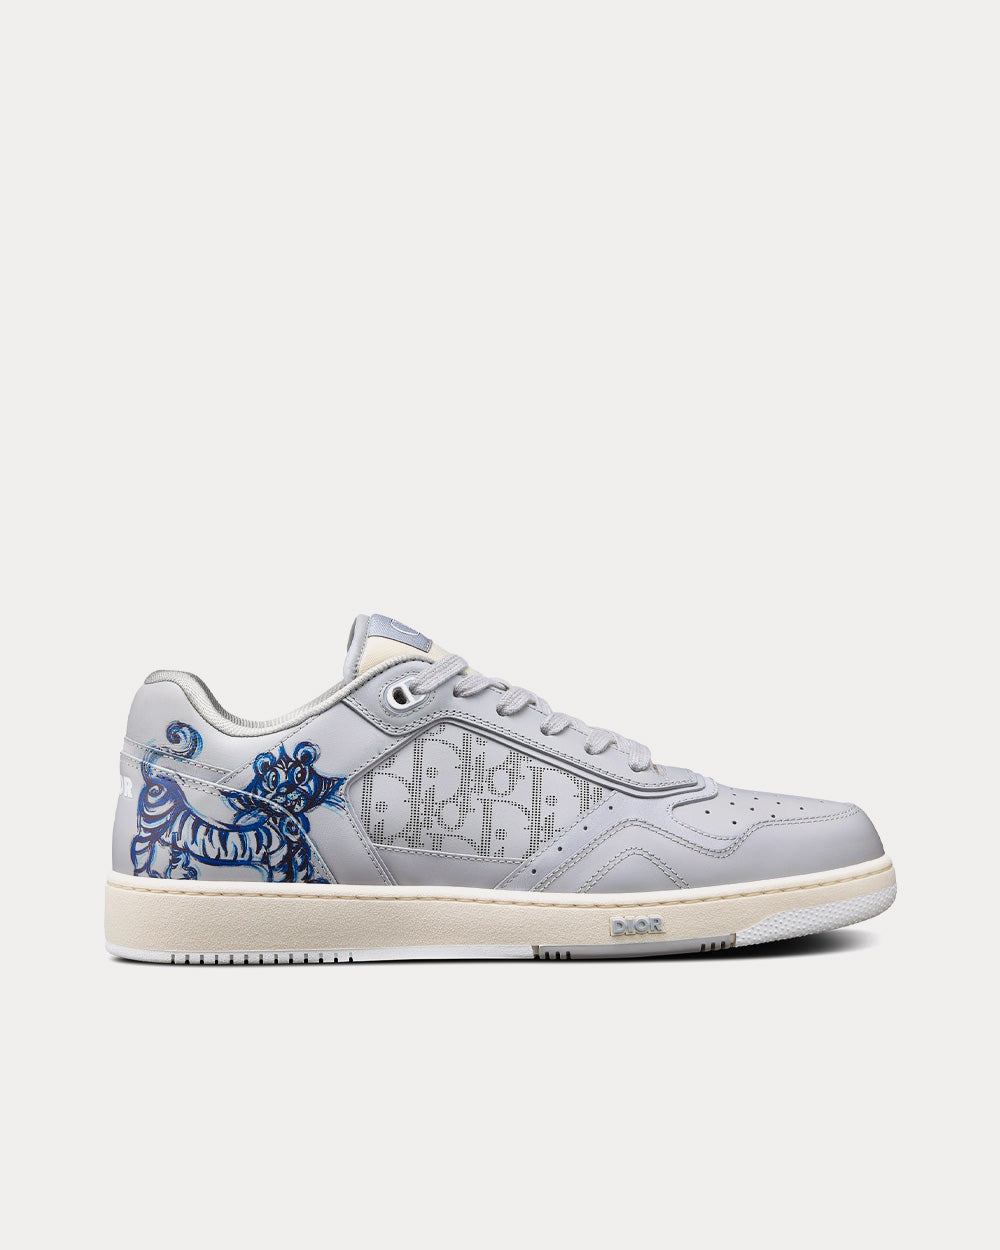 Dior x Kenny Scharf - B27 Smooth Calfskin with Gray Dior Oblique Galaxy Leather and Blue Tiger Print Low Top Sneakers